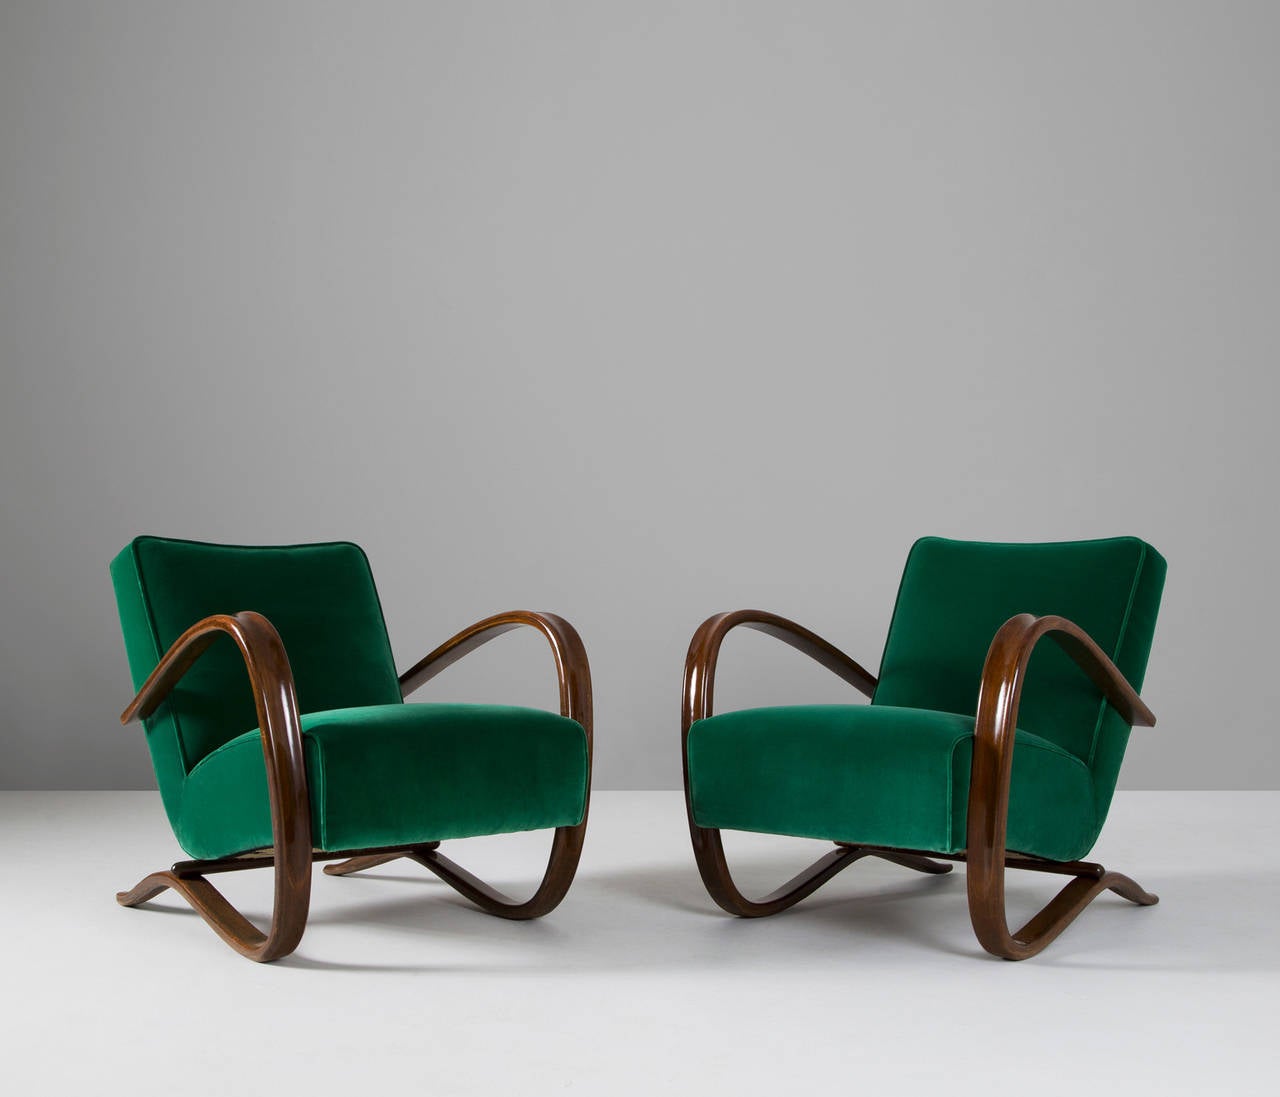 Pair of lounge chairs, in wood and green fabric, by Jindrich Halabala, Czech Republic, 1930s. 

Very dynamic chairs with a curved base that fluently ends in the armrests.
These chairs are completely refurbished and reupholstered in a green velvet